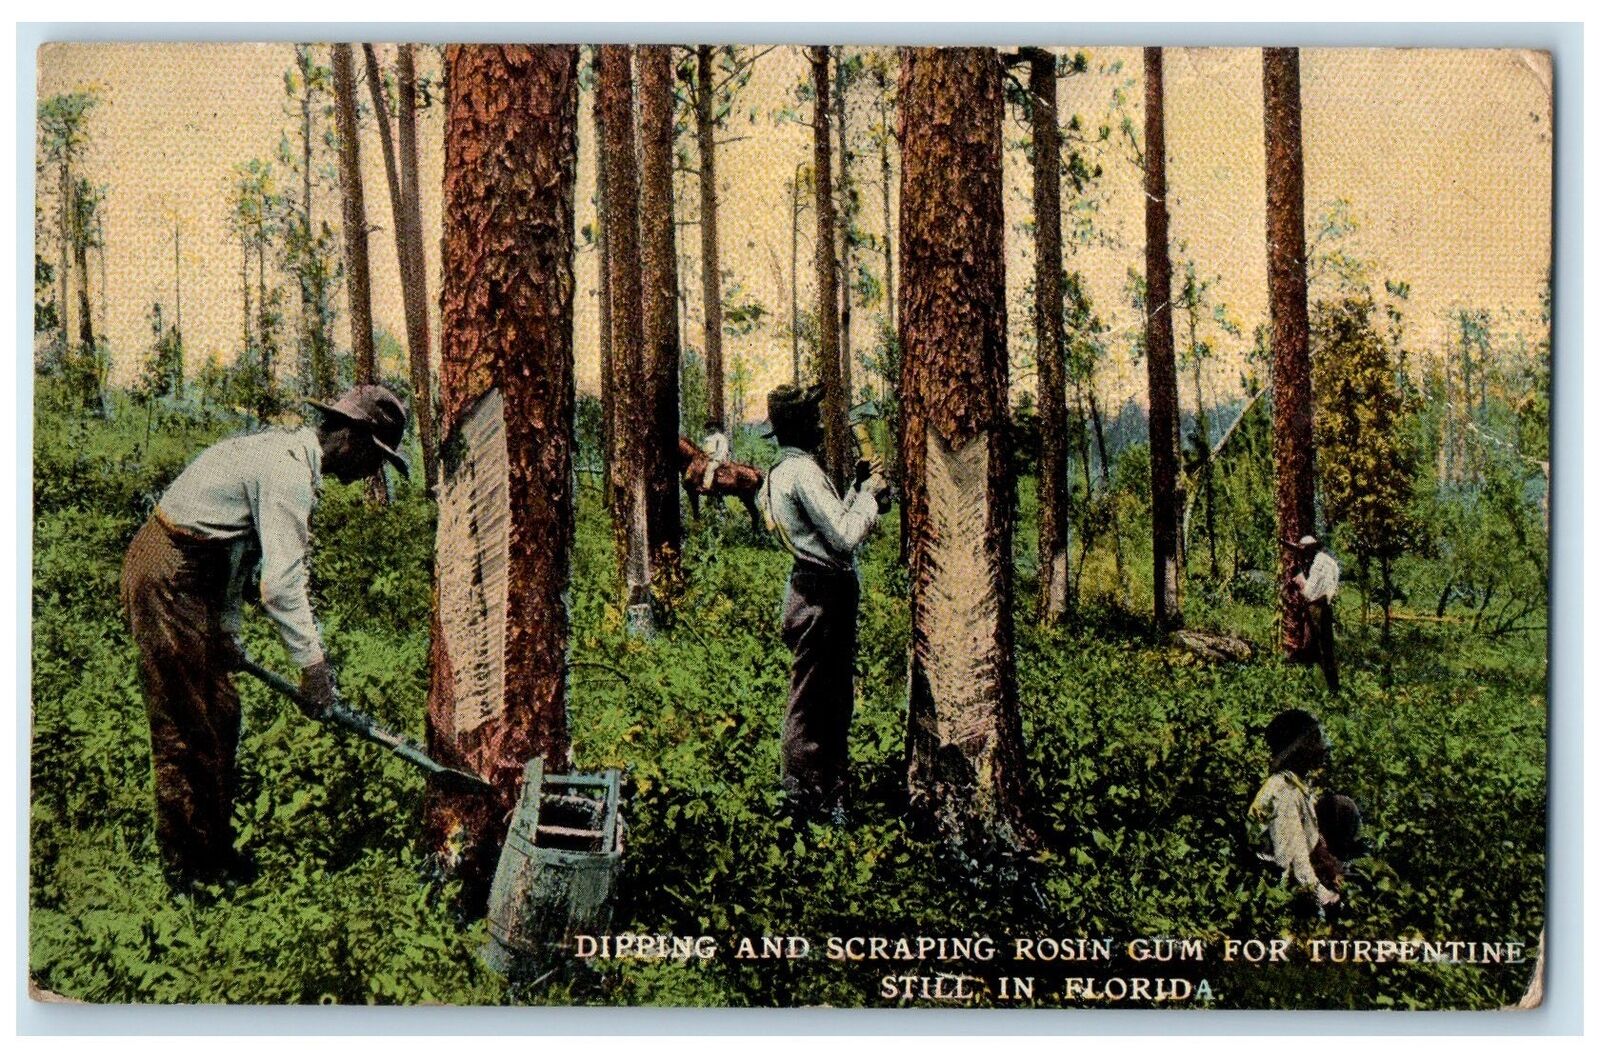 1913 Dipping & Scrapping Rosin Gum For Turpentine Still In Florida FL Postcard